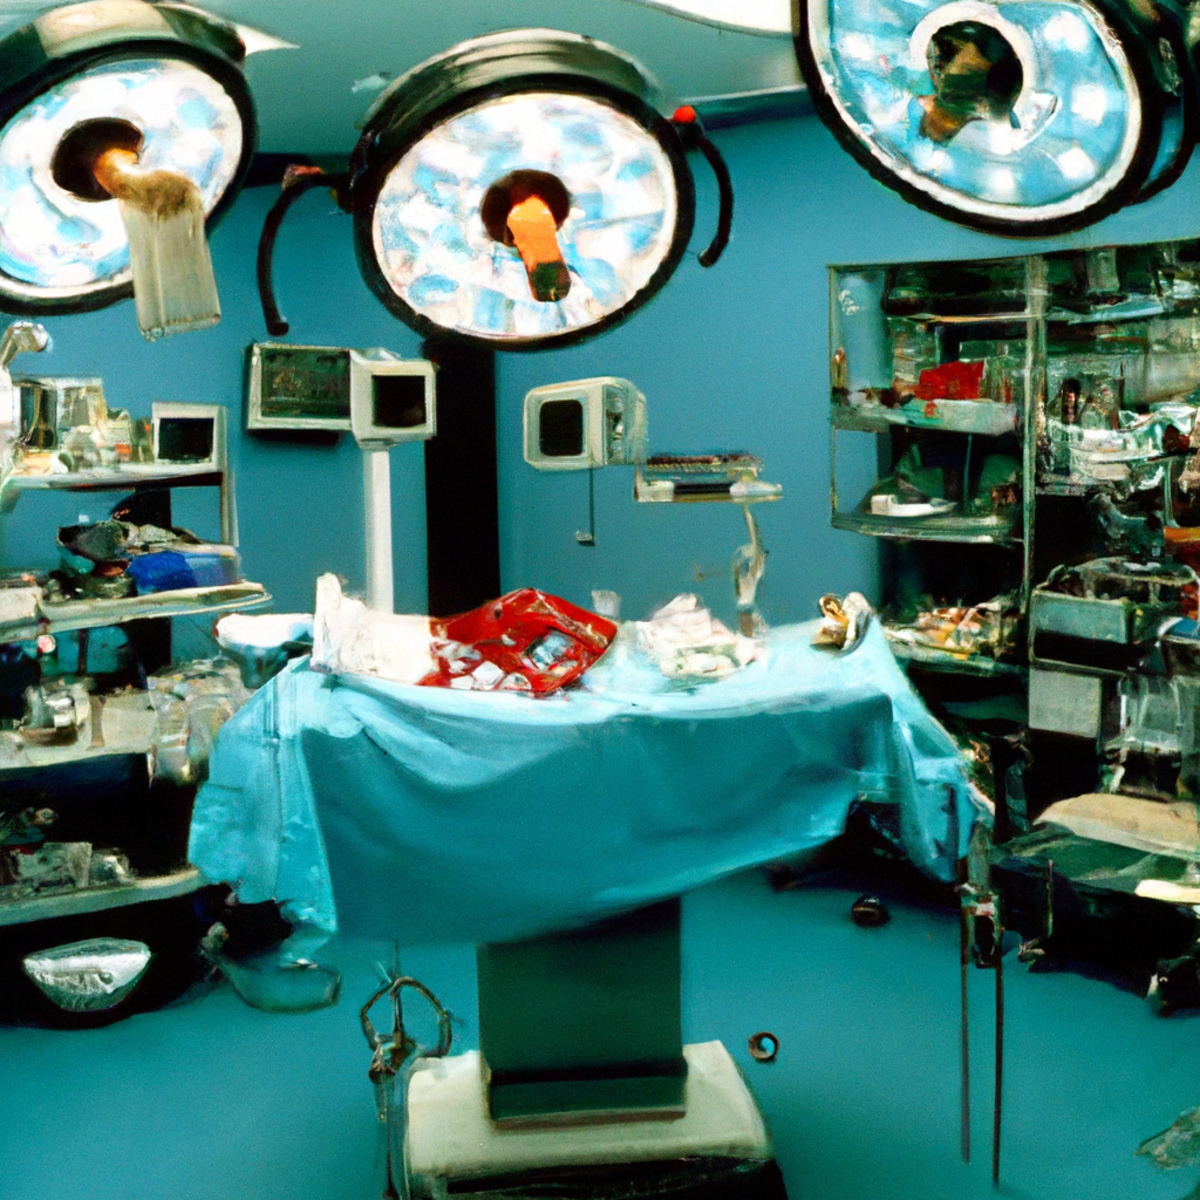 Surgical theater with well-lit operating room, sterile equipment, and a surgical microscope for studying gallbladder leiomyosarcoma.